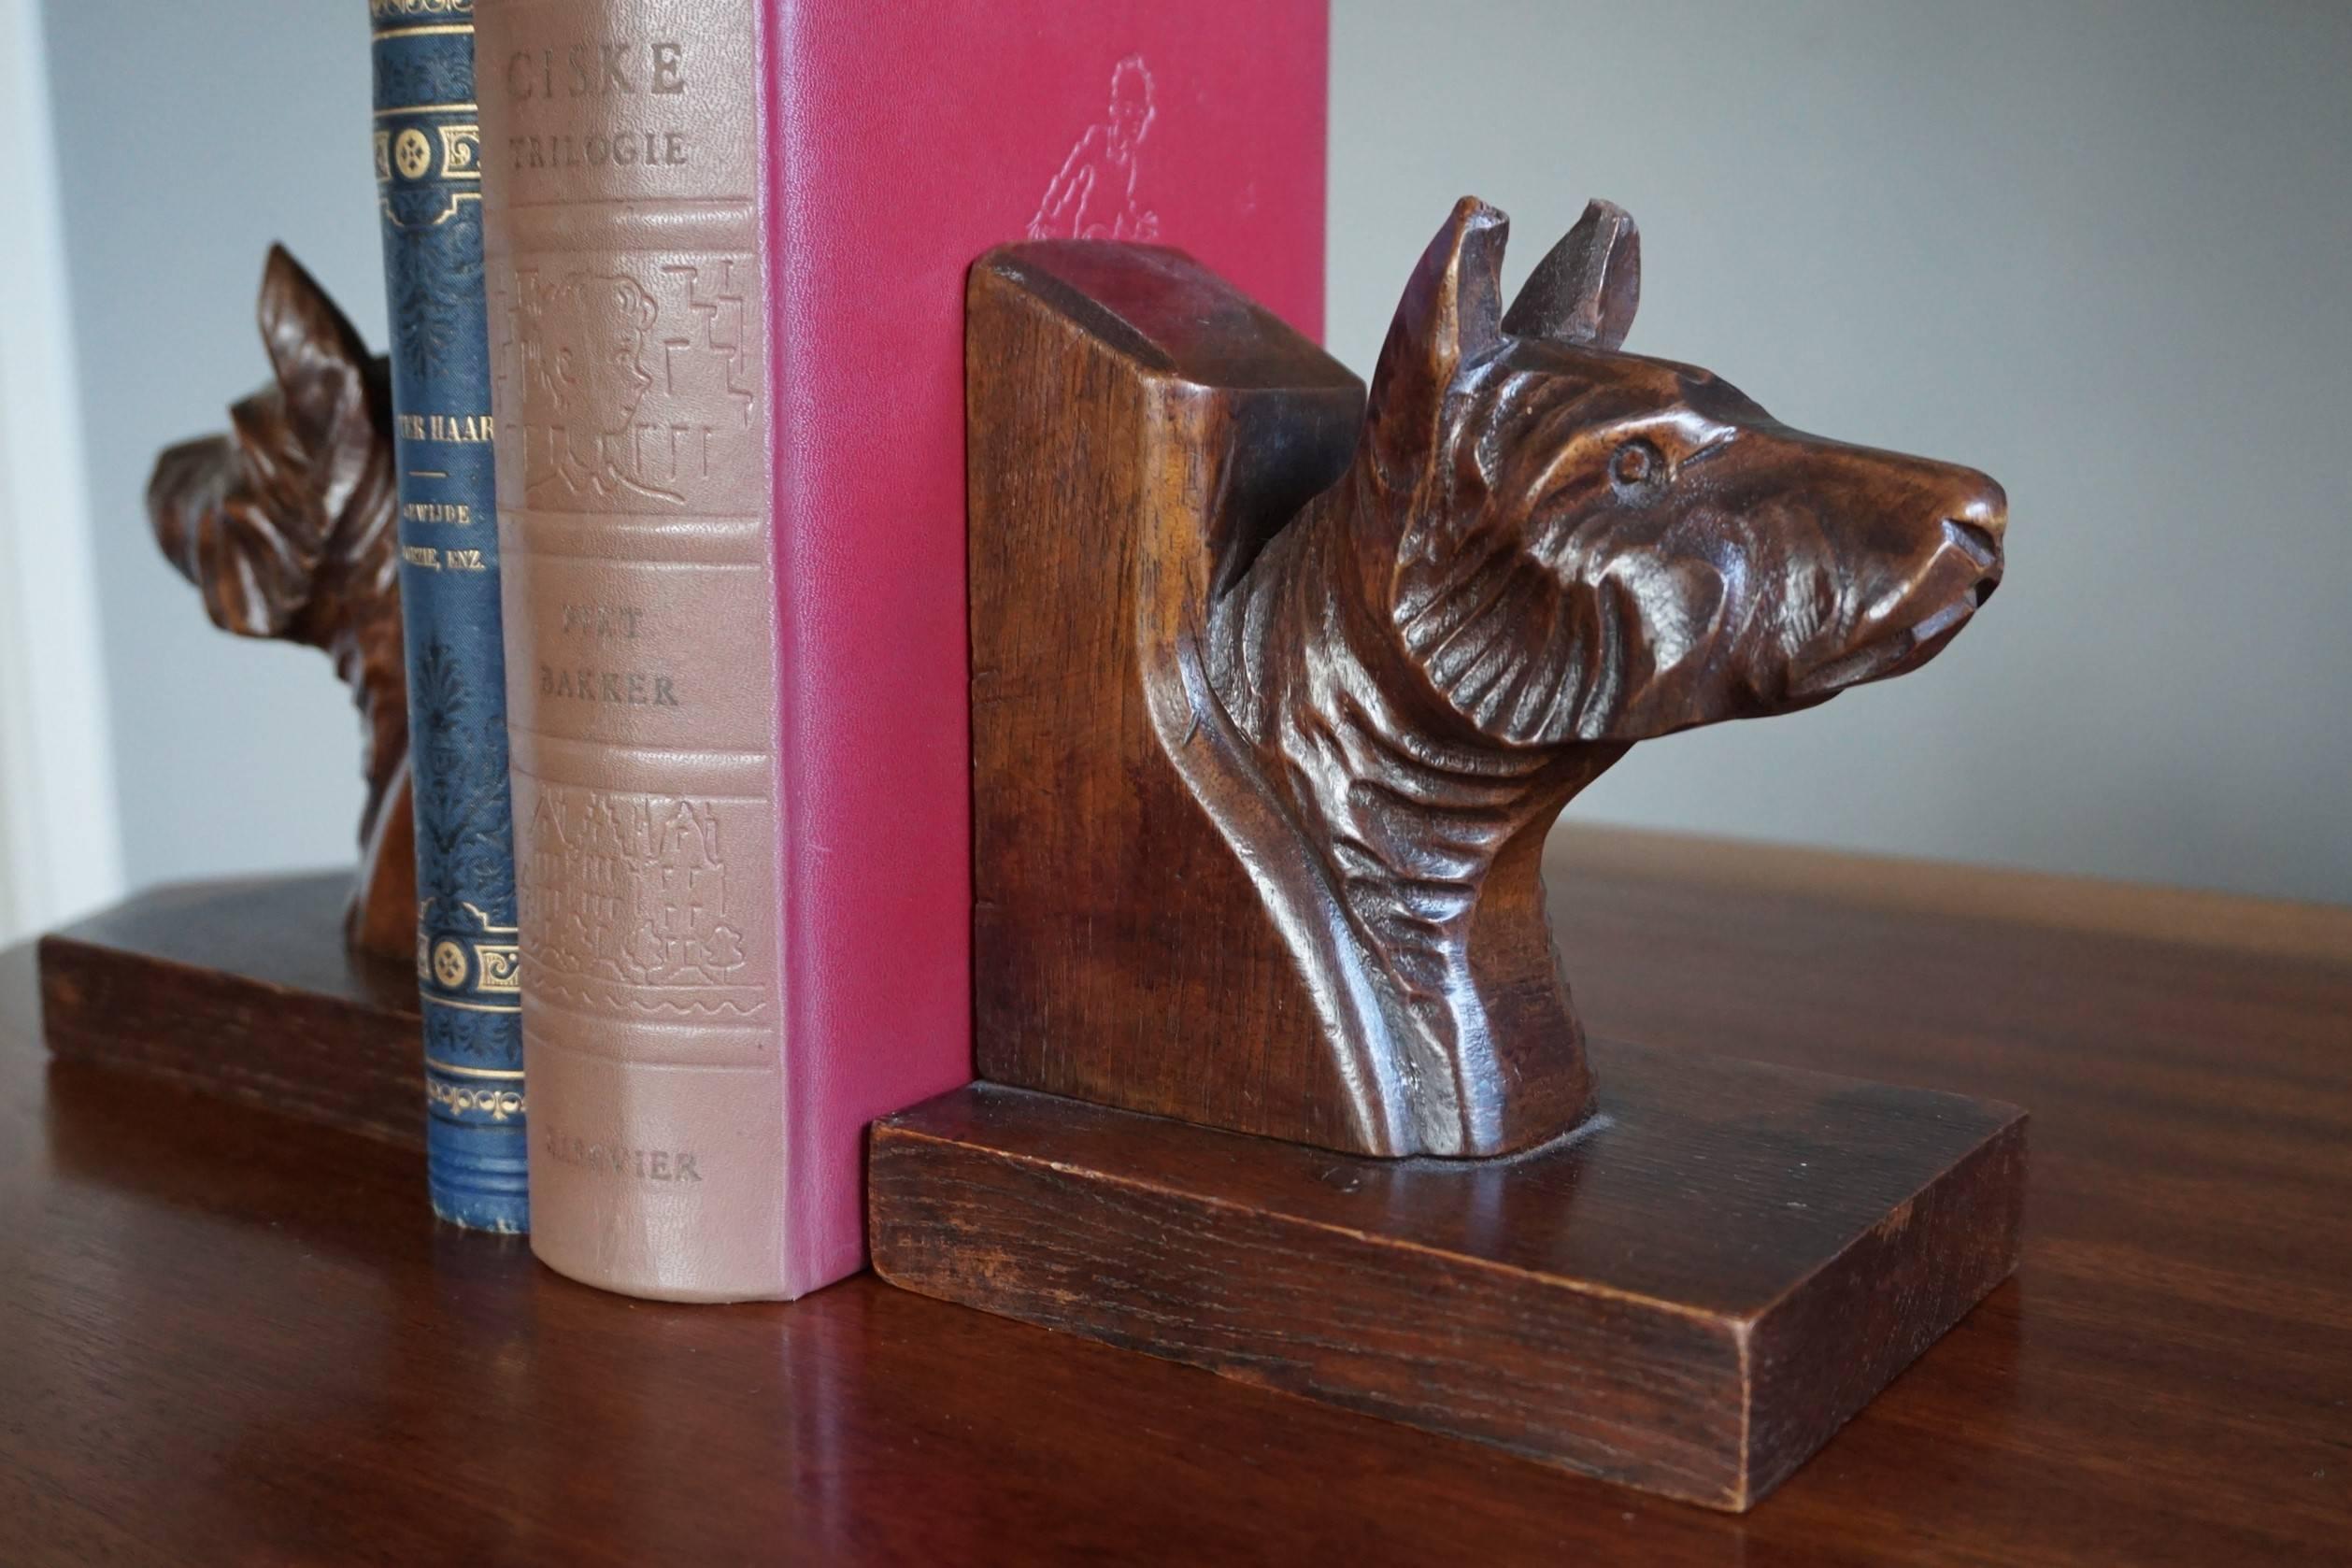 Beautifully carved dog busts bookends.

There can be two reasons why we don't know which breed of dogs these quality carved bookends represent. The first one is that we simply lack the knowledge. The second one is that, because many dog breeds have